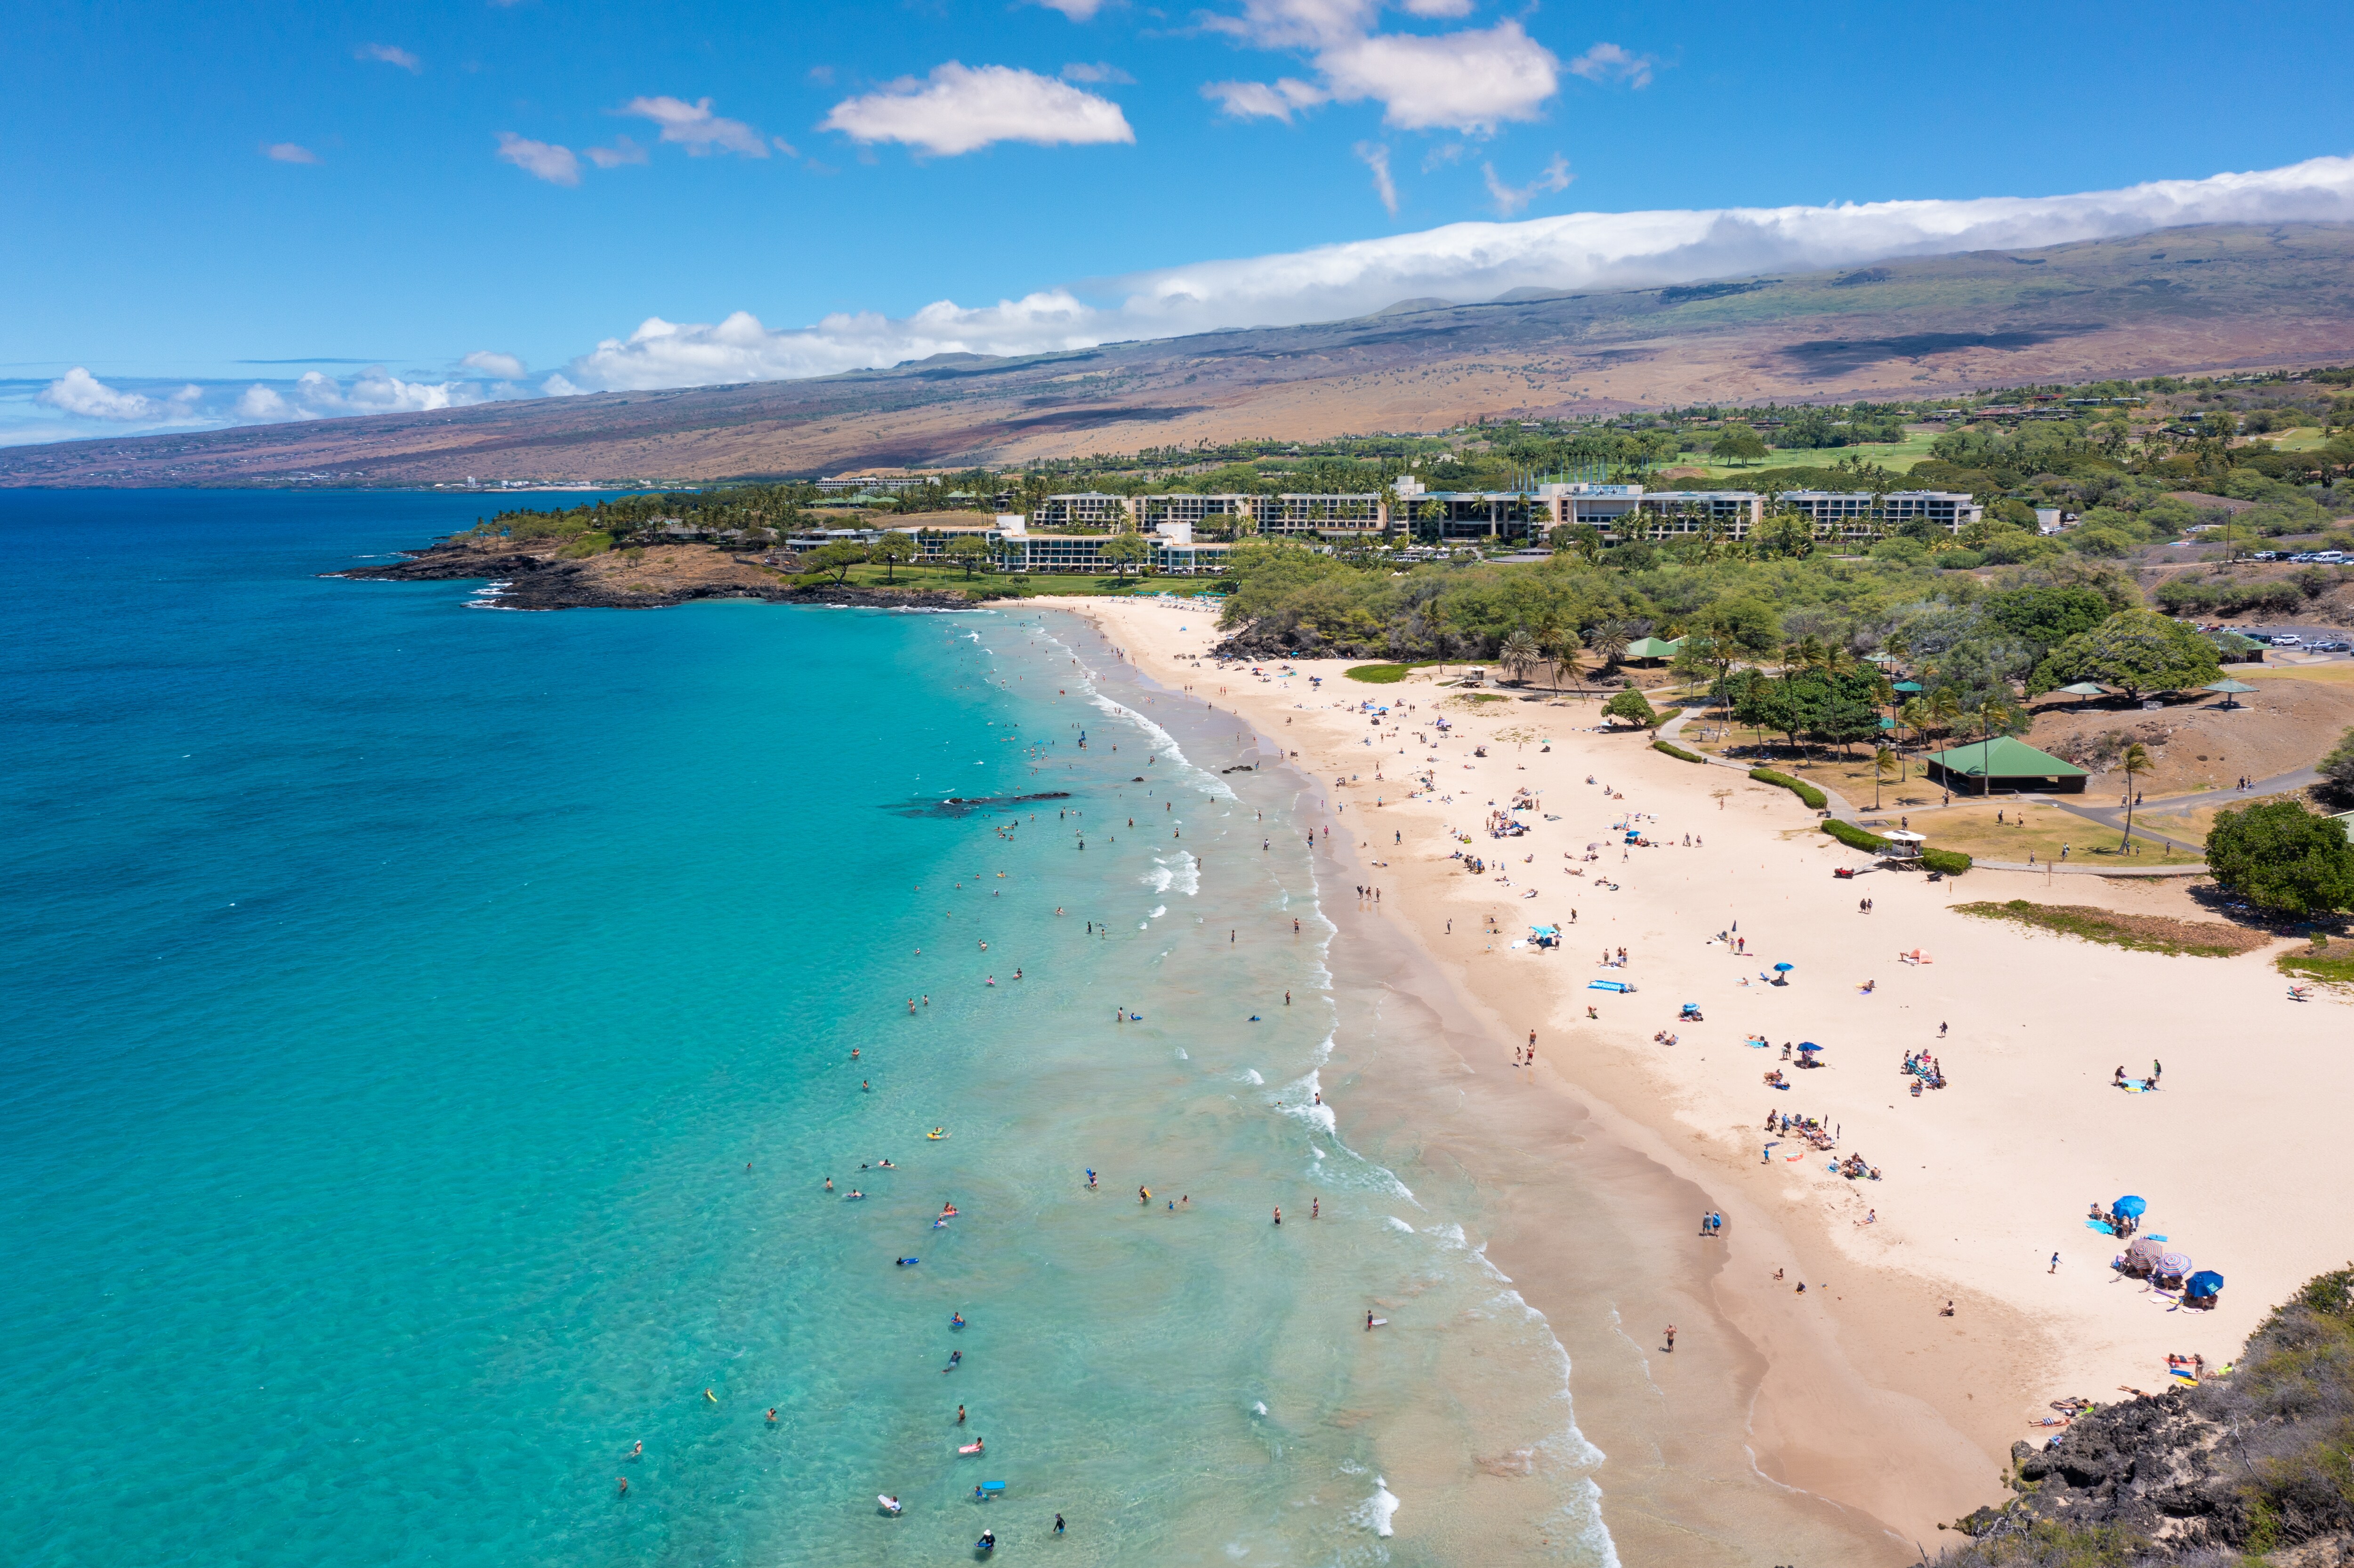 Minutes away from Hapuna Beach - voted #1 beach in USA